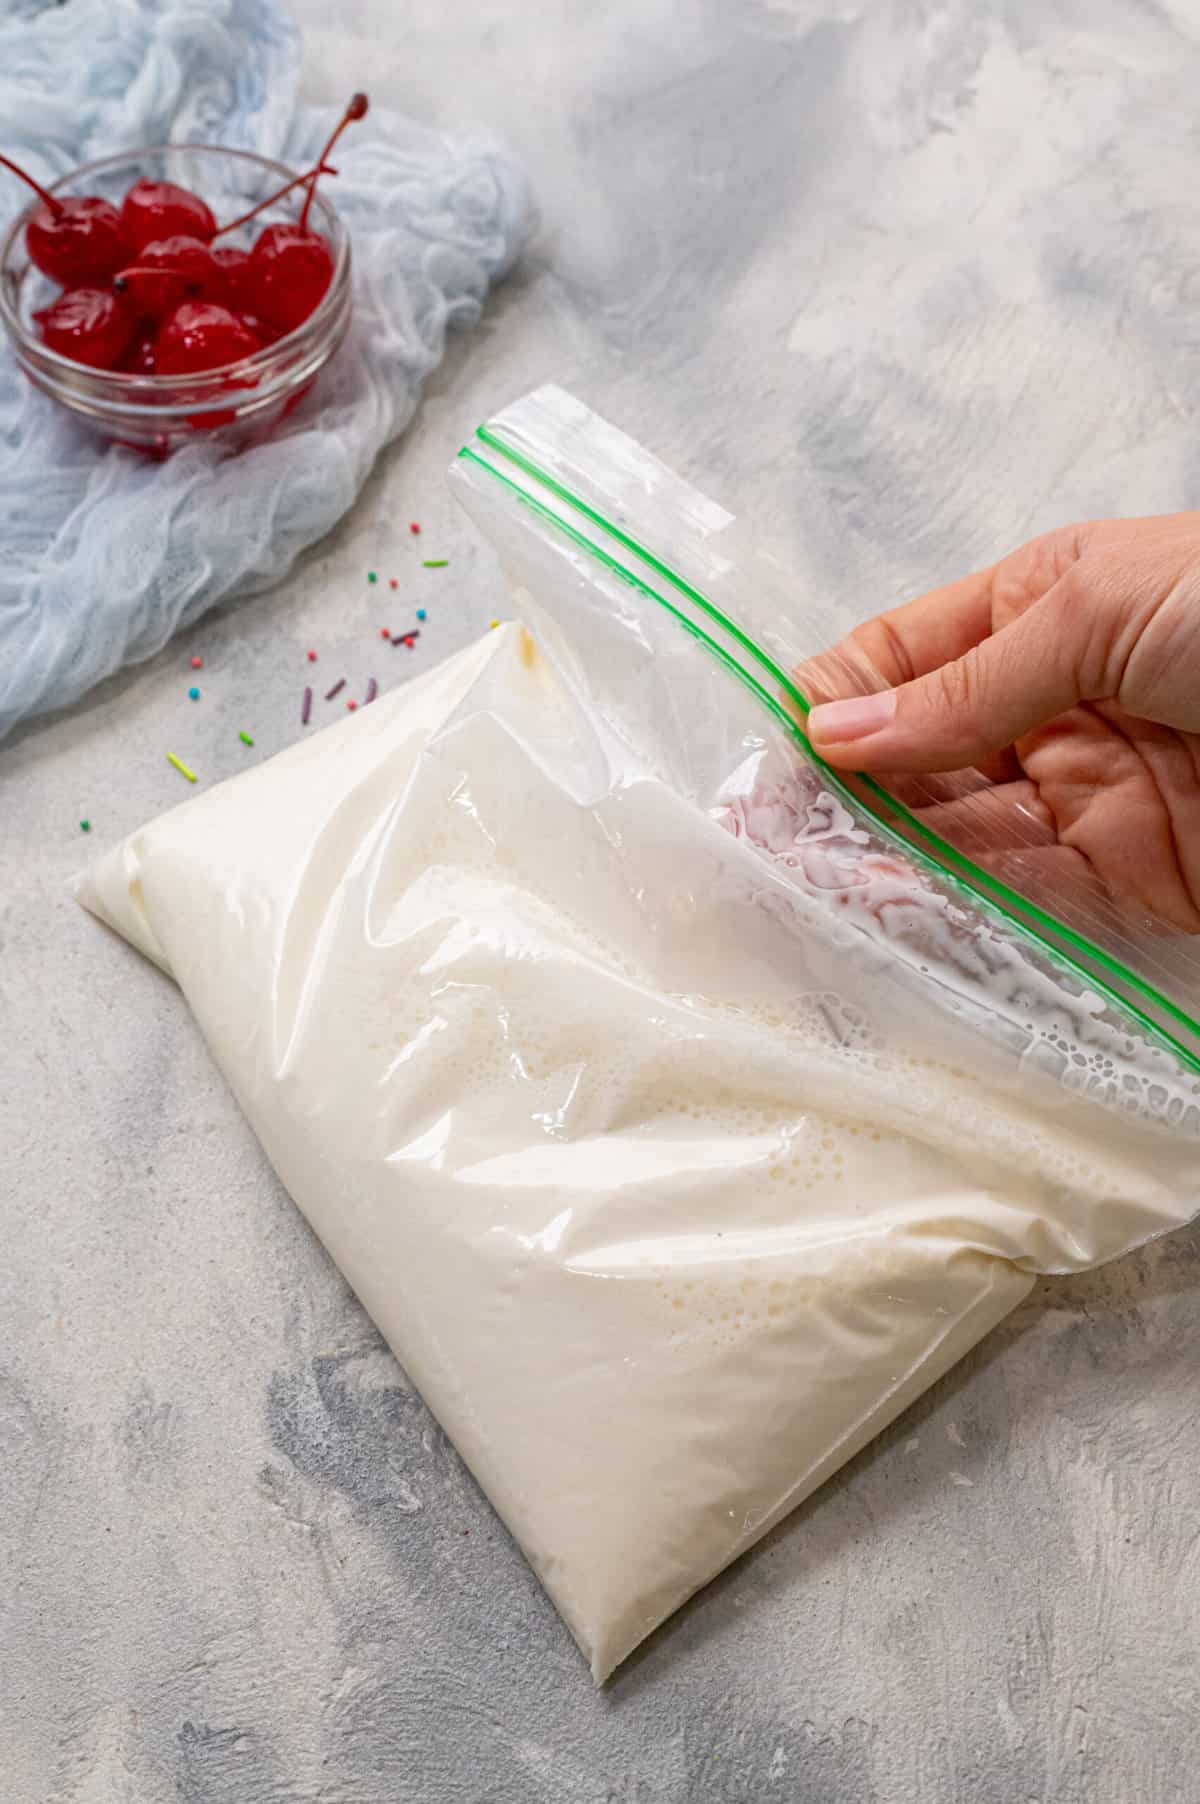 Place all ingredients in a bag and mix around.